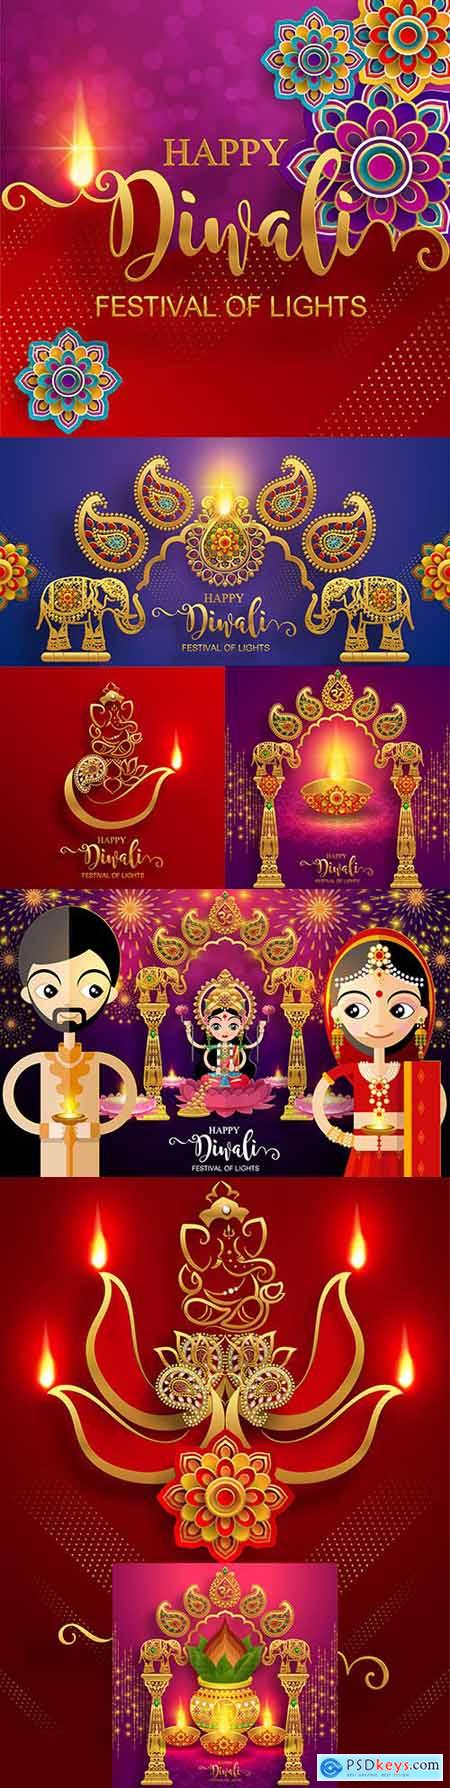 Divali, dipavali festival of lights India with gold drawing